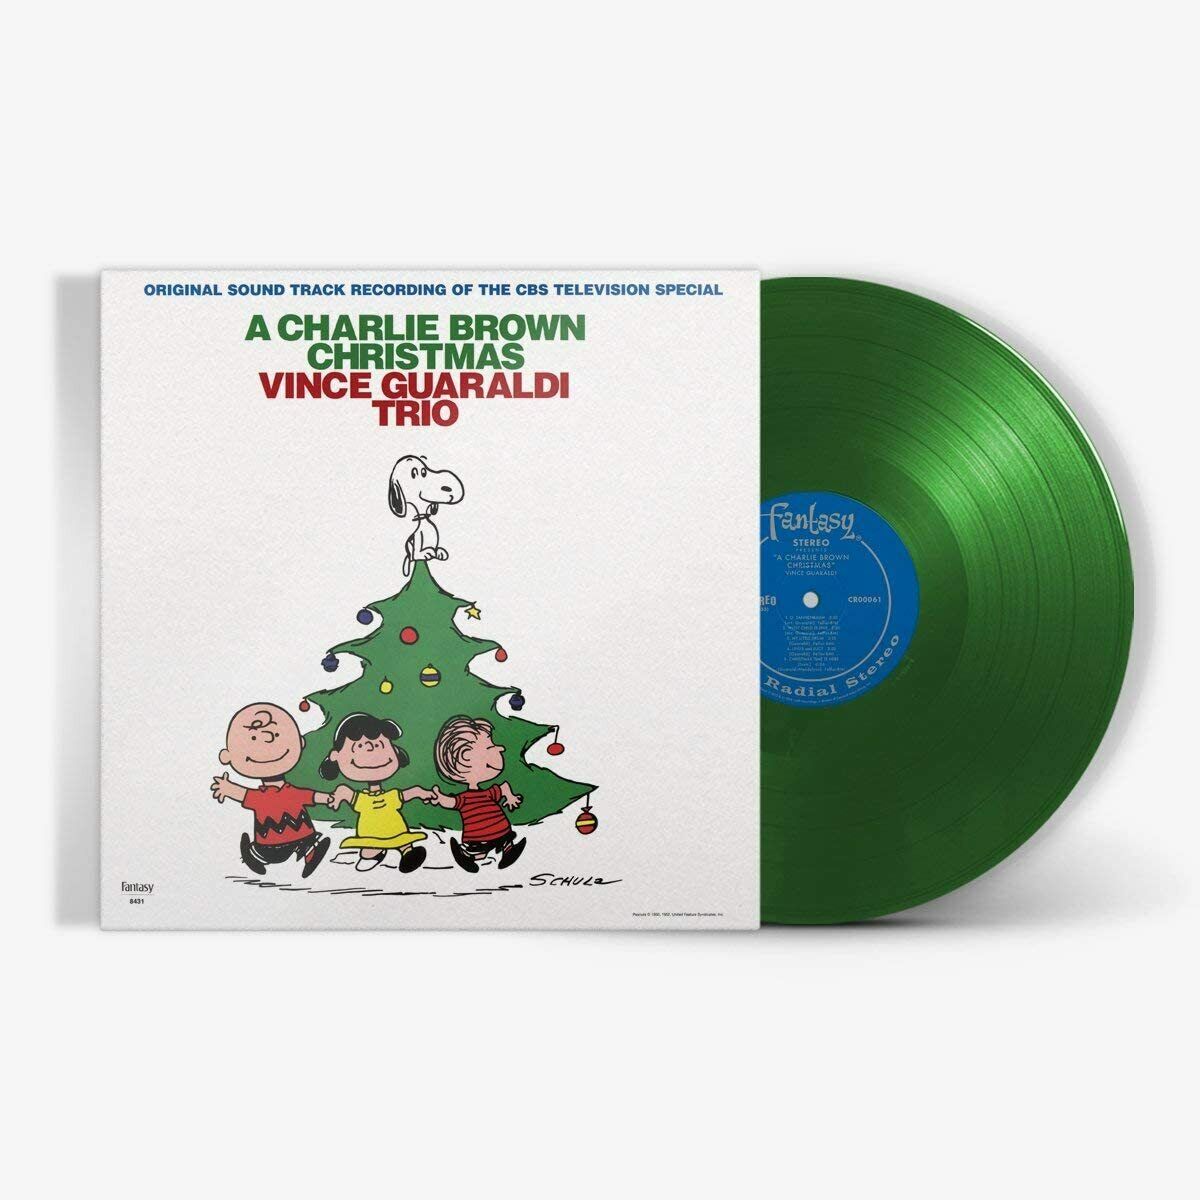 A CHARLIE BROWN CHRISTMAS VINYL NEW LIMITED GREEN LP PEANUTS VINCE GUARALDI